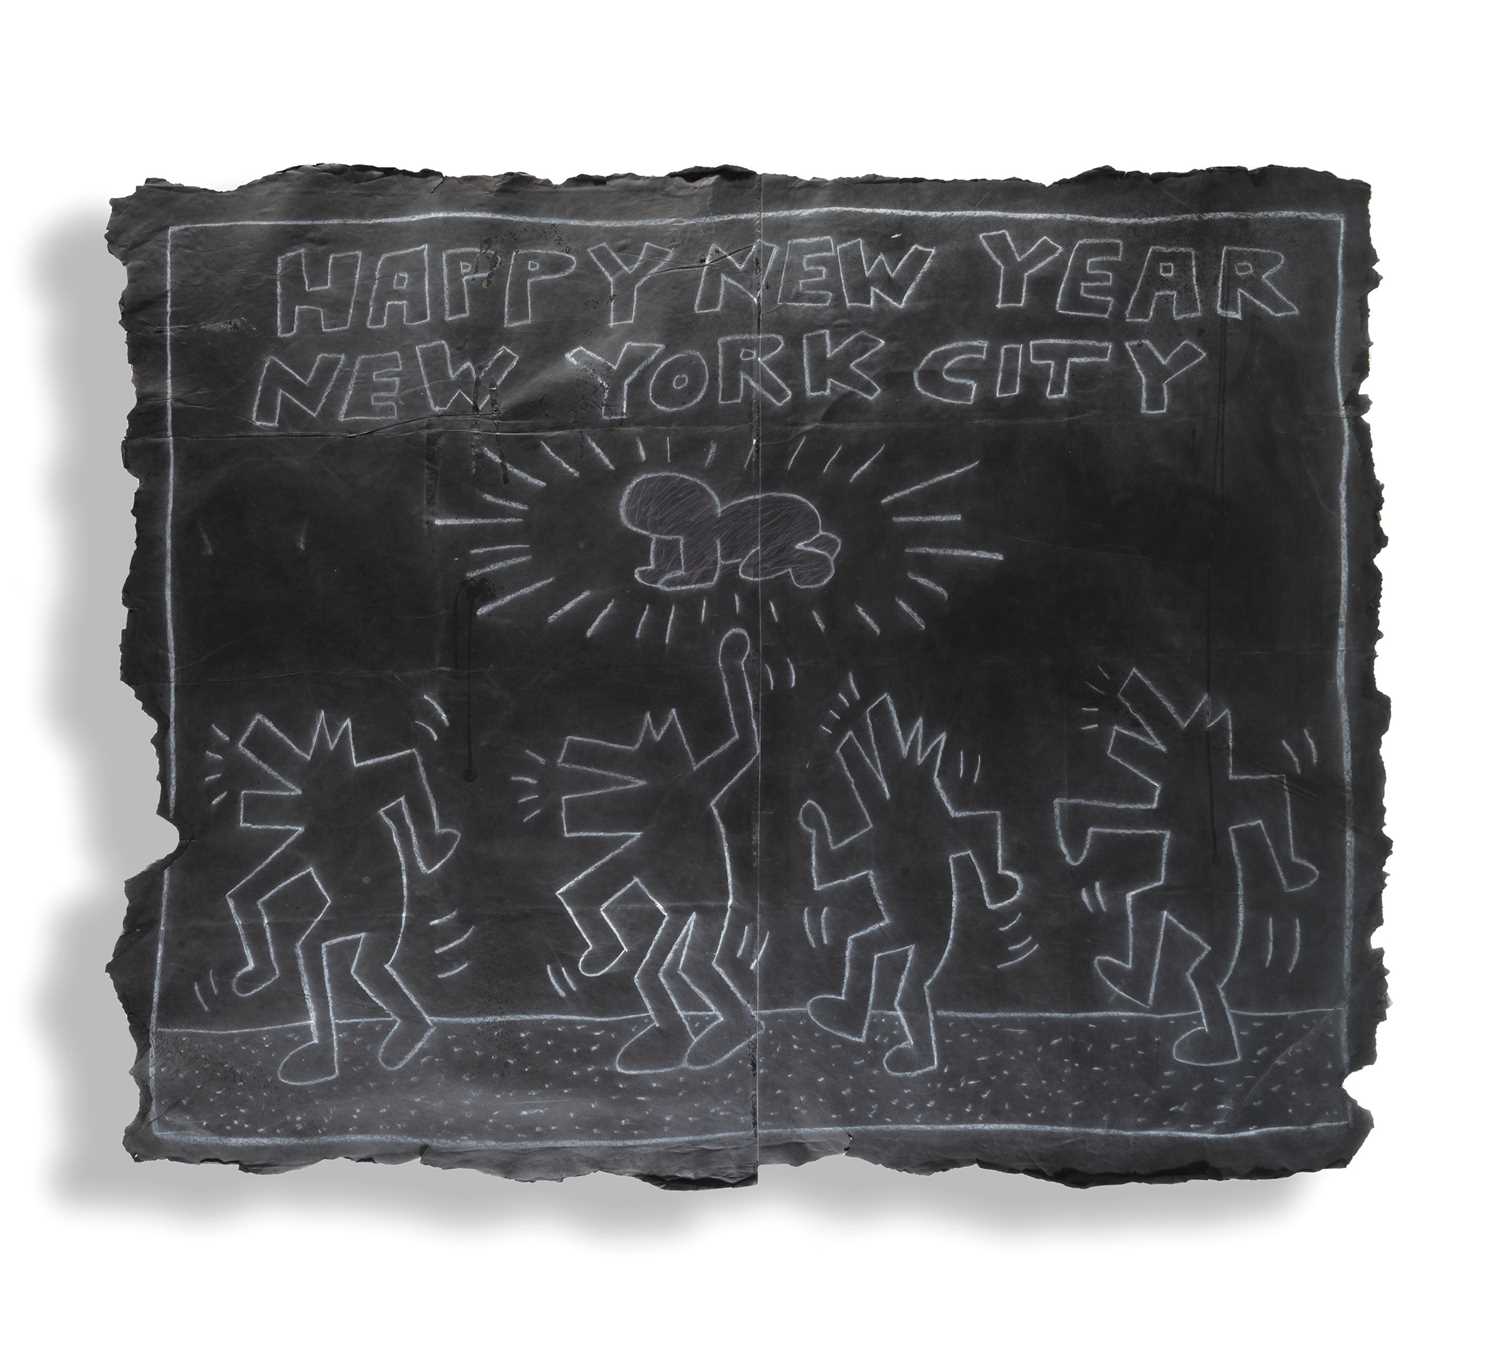 Lot 108 - Keith Haring (American 1958-1990), 'Happy New Year New York City', 1980s